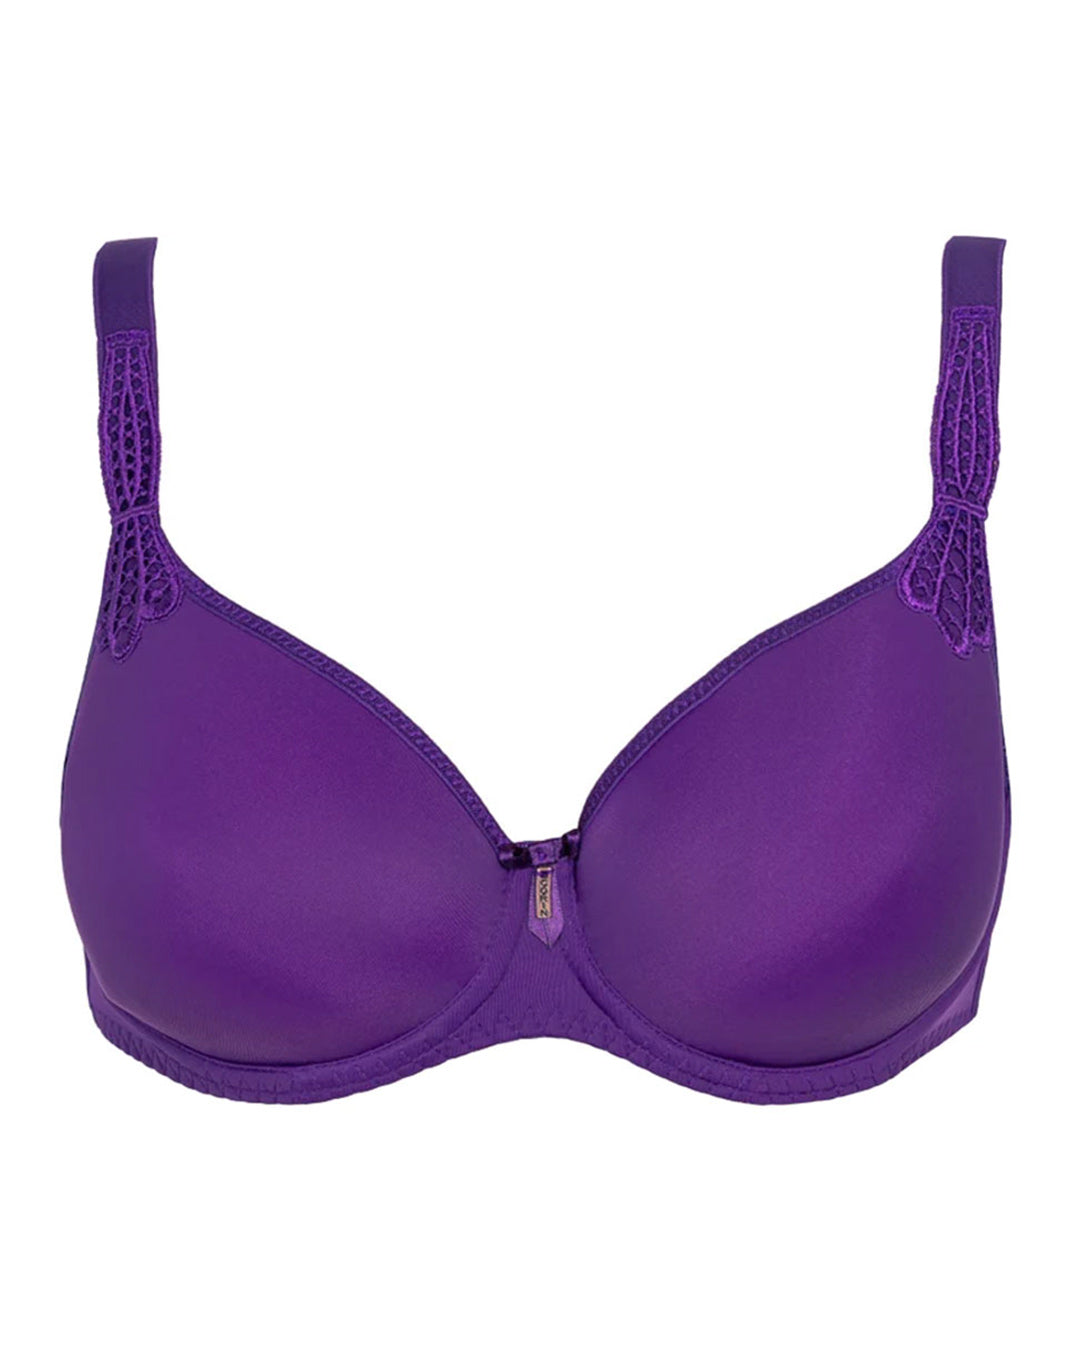 Evelyn Wireless T-shirt Bra - Coral – Purple Cactus Lingerie